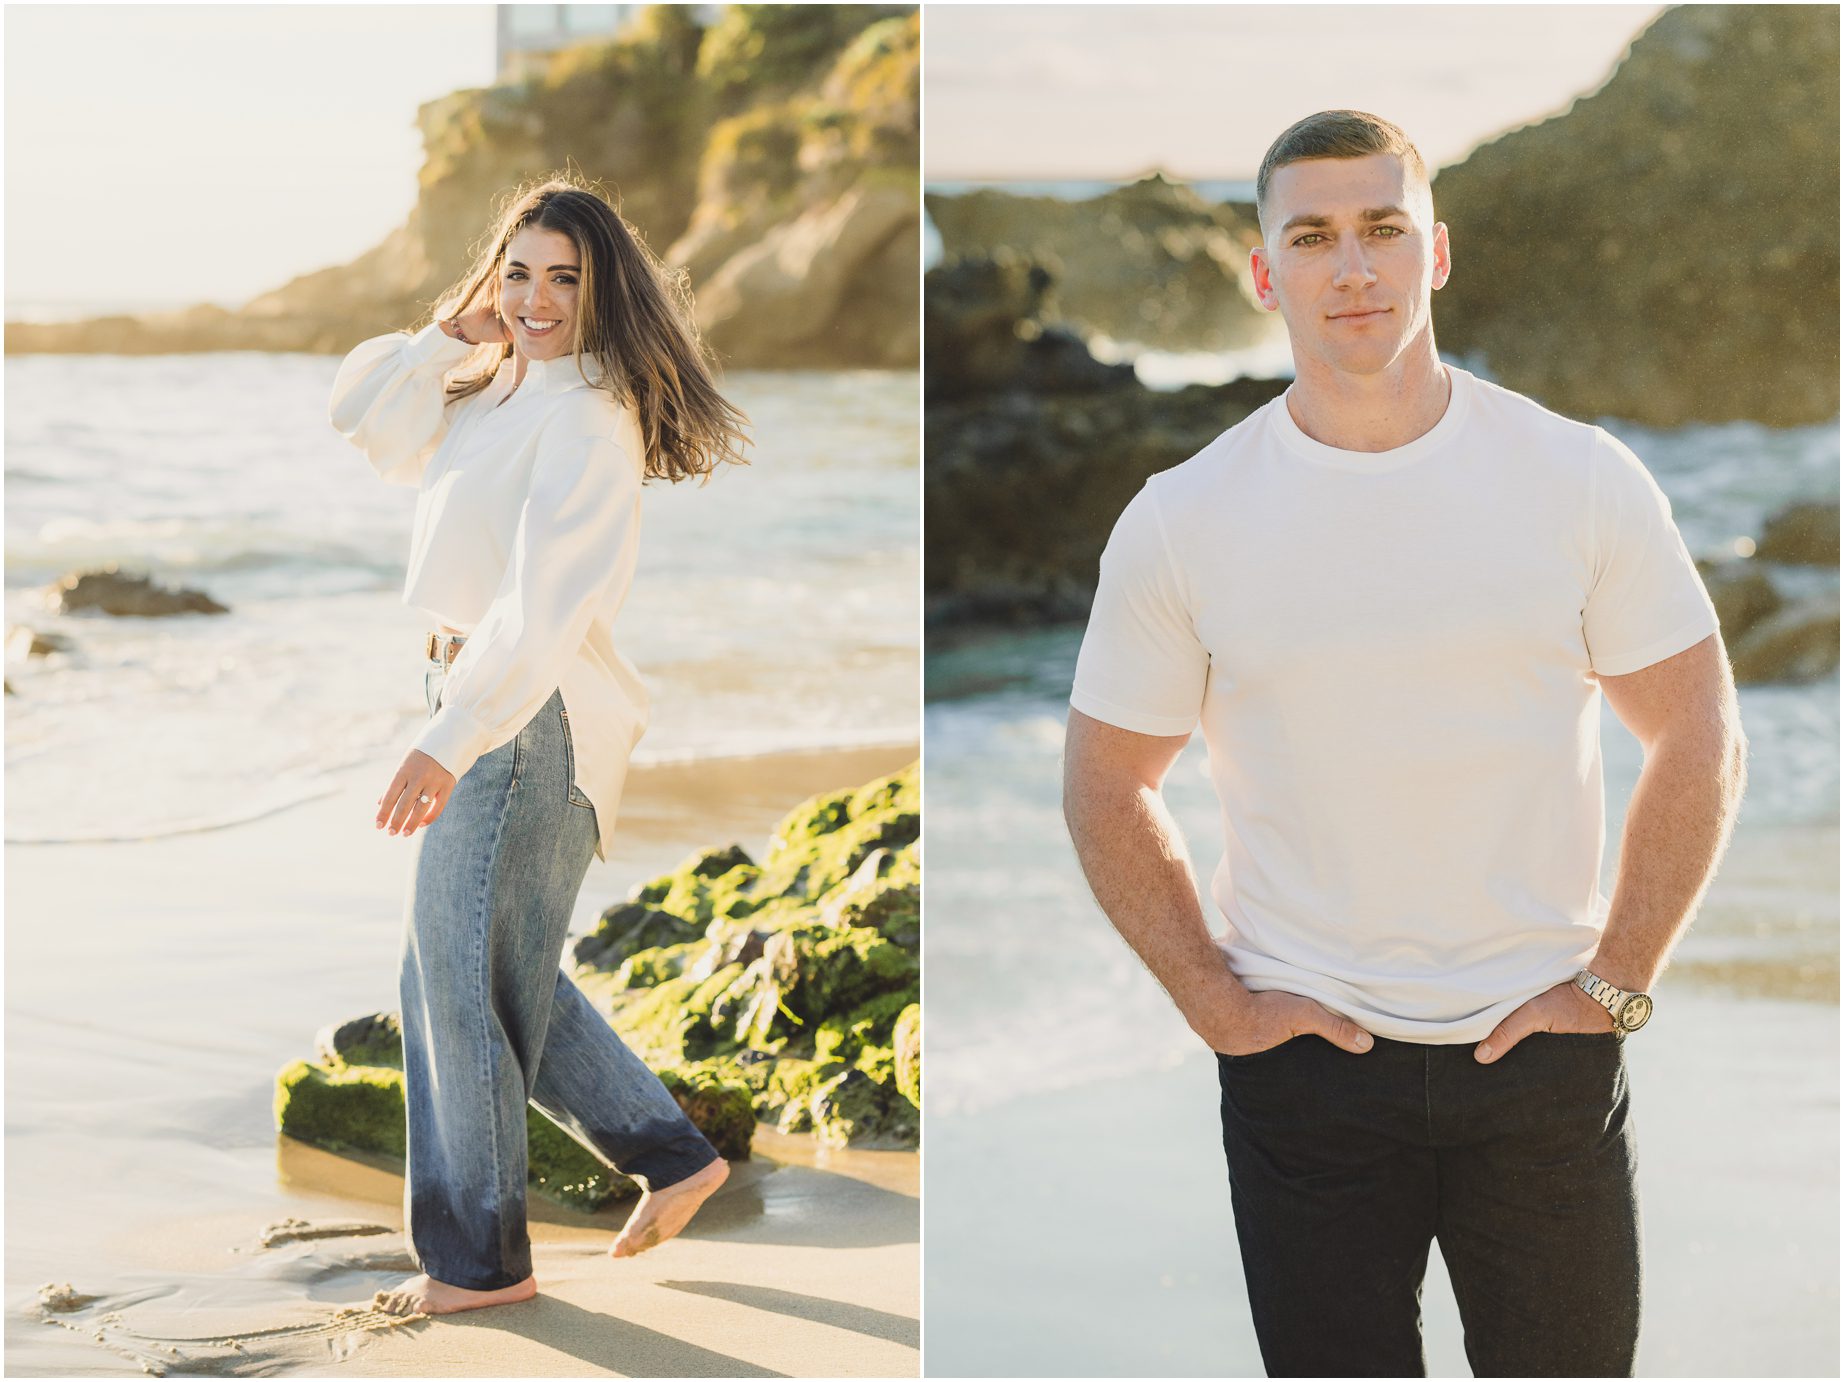 An engaged couple poses for separate photos during their engagement session in Laguna Beach